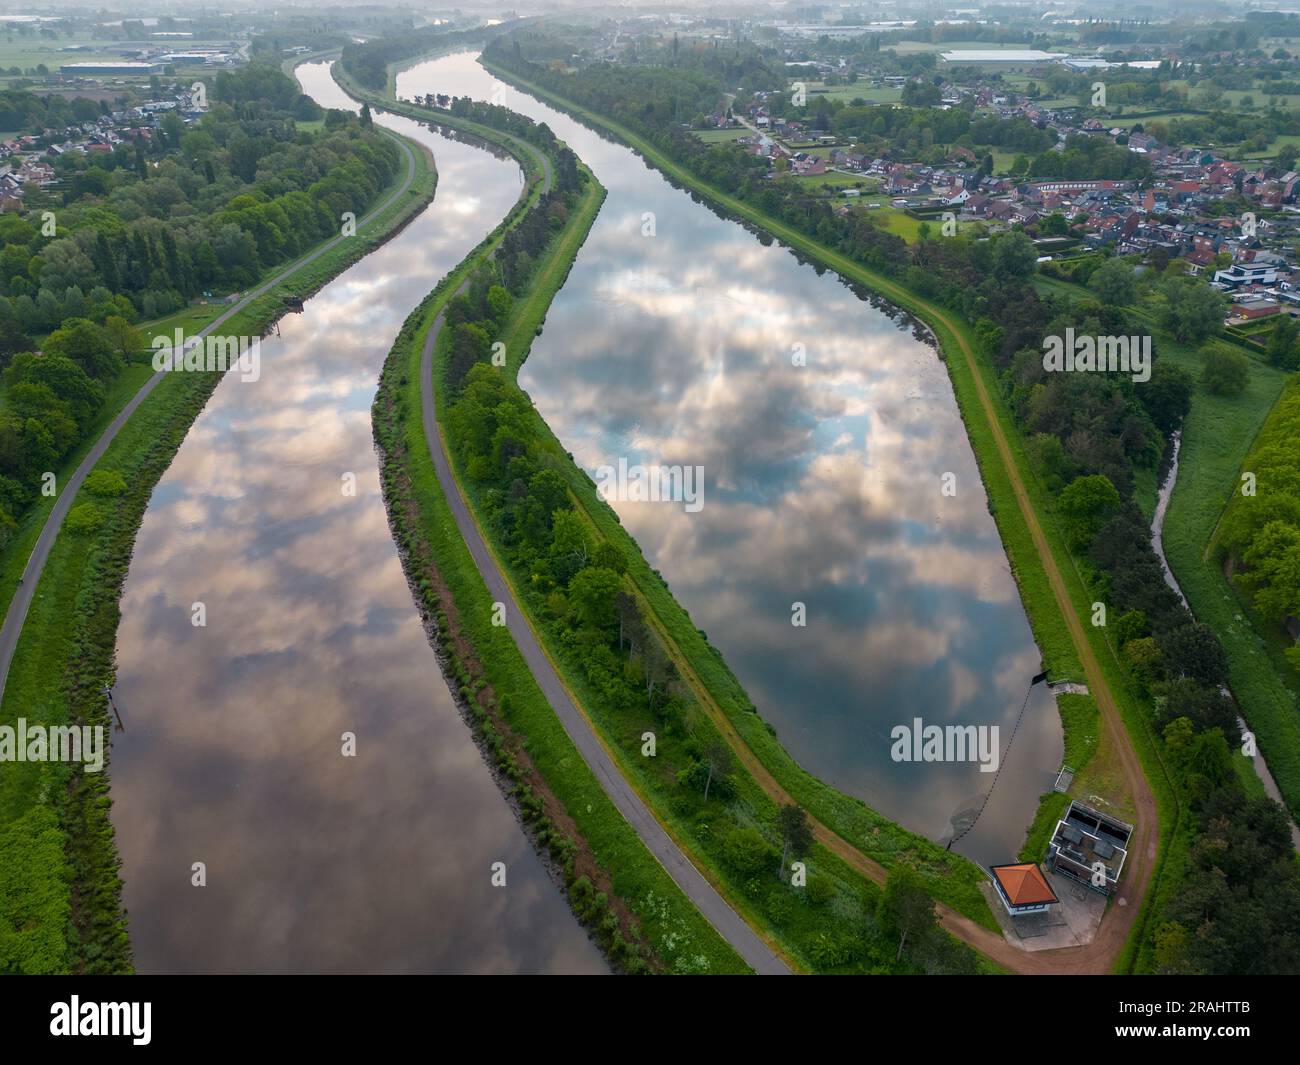 Aerial view of a colorful dramatic sunrise sky over the river Nete in Duffel, Belgium. River with water for transport, agriculture. Fields and meadows. River and forest landscape. High quality photo Stock Photo